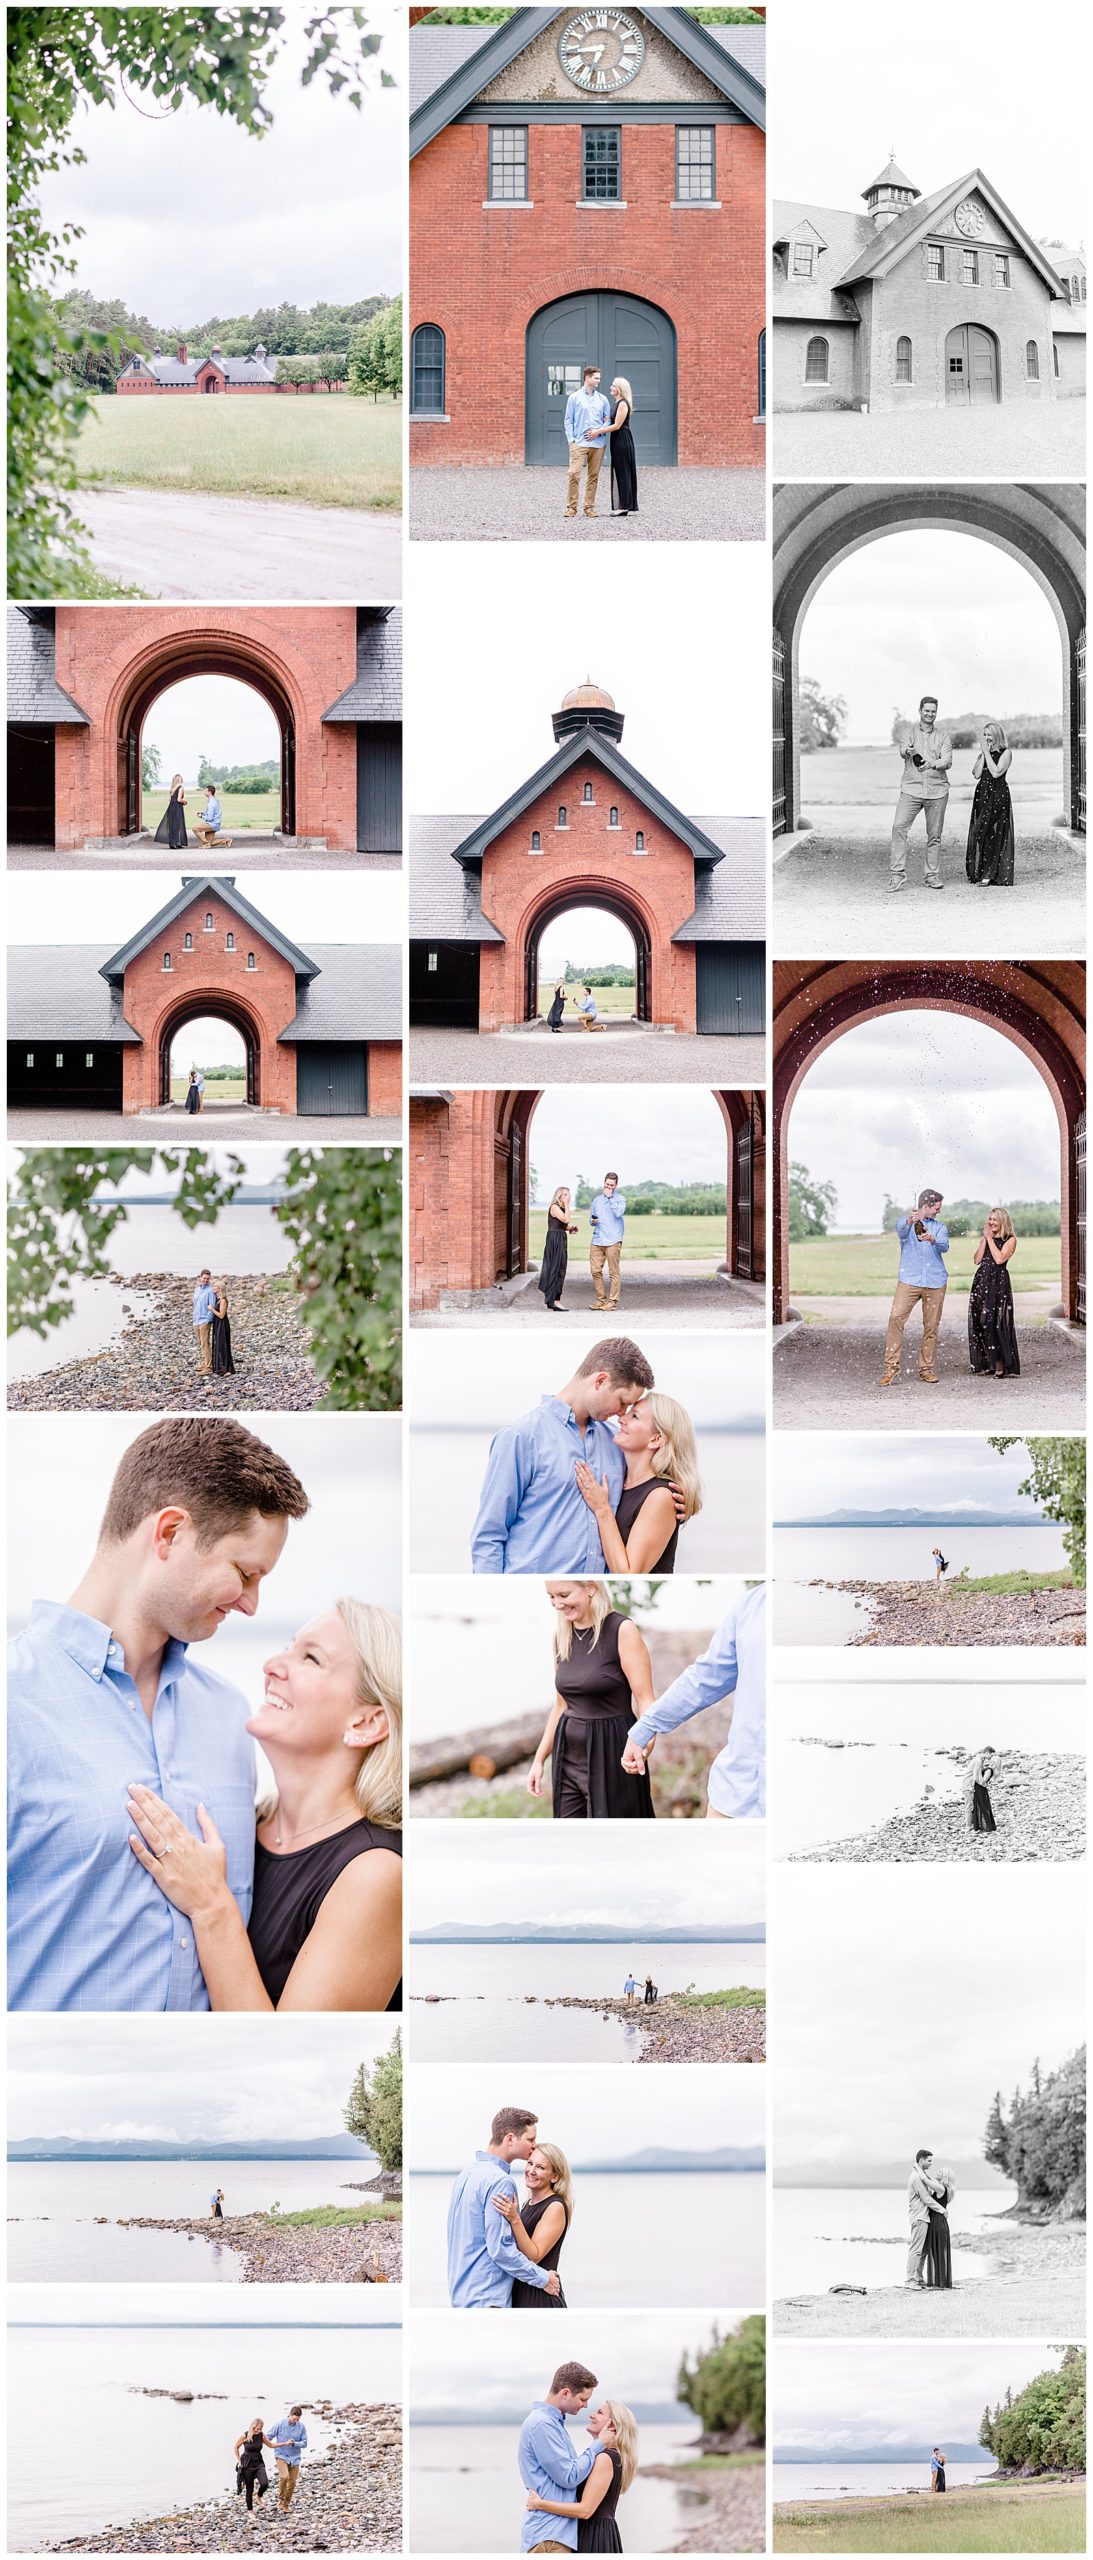 Anne Mientka Photography proposal photographer